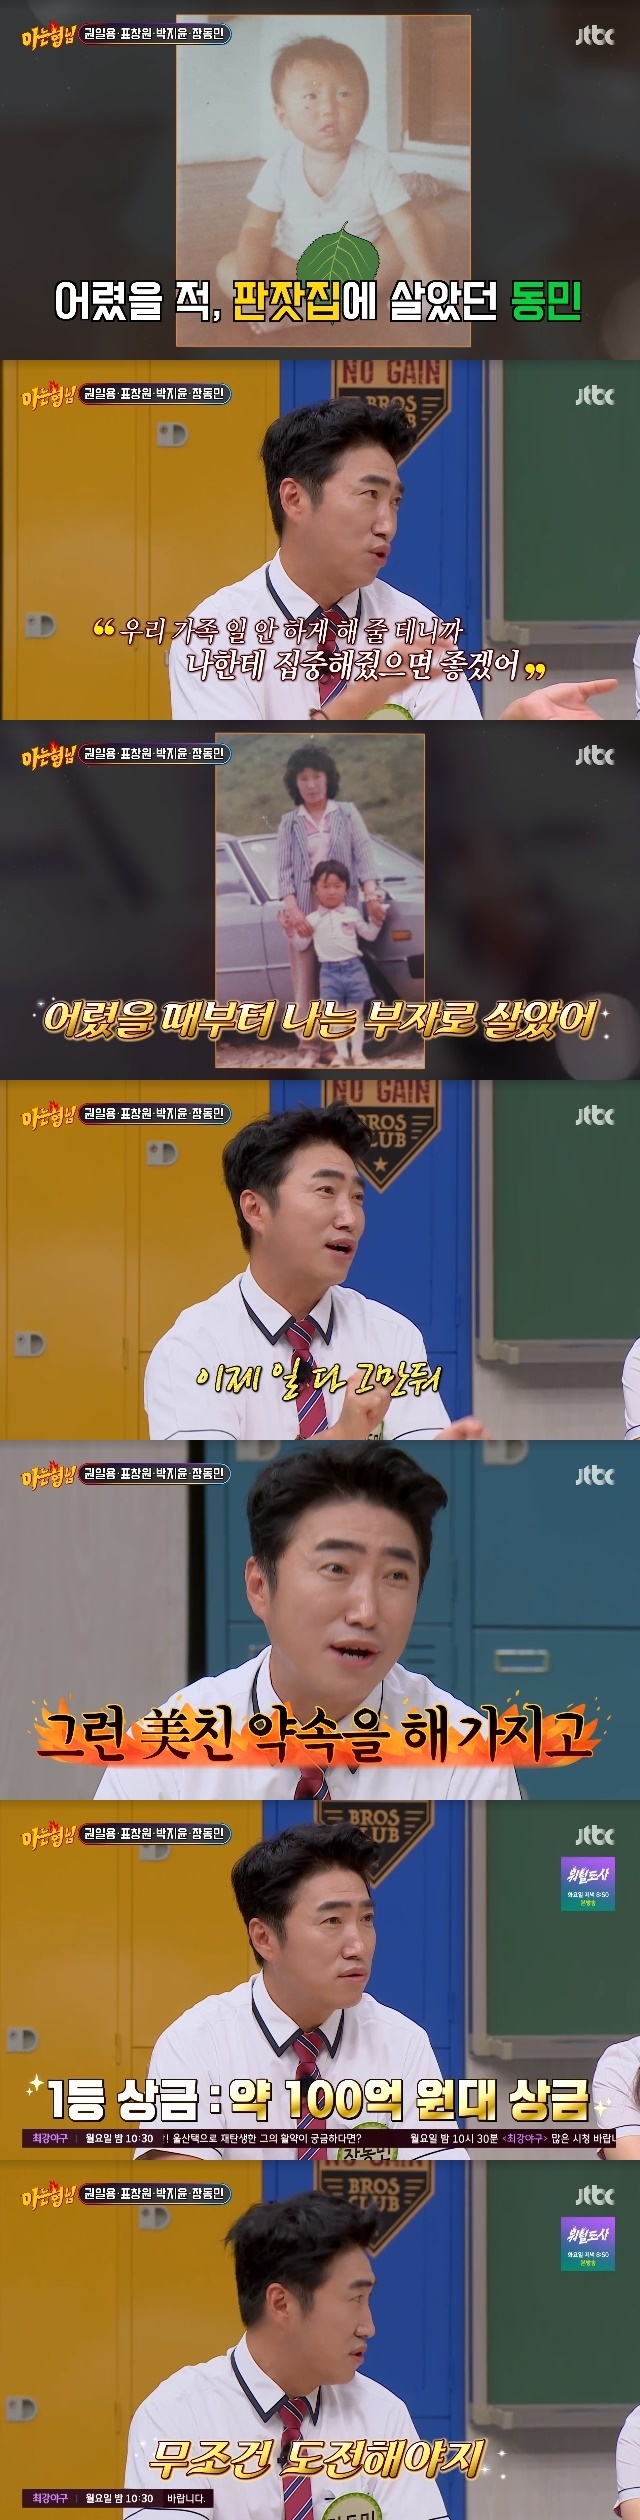 Jang Dong-min, a comedian, announced his future goals with his past successes.For Kwon Il-yong, Pyo Chang-won, Park Ji-yoon, and Jang Dong-min were transferred to your brothers school in the 398th JTBC entertainment Knowing Bros (hereinafter known as Knowing Bros) broadcasted on August 26th.Jang Dong-min said, I had a special occasion to be friends with Park Ji-yoon, who was born in 1979. When I was the youngest comedian, I had to say hello to everyone.I followed him for a while. I did not even know what it was, but he said, I went to Park Ji-yoon and radio for a year. The problem is that the radio broadcasting was a broadcasting that only the people on the deep-sea fishing boat could hear. The frequency is not caught in Korea. Jang Dong-min said, I also talked to my house.I have to take a deep-sea fishing boat to listen to it, he said. In fact, now that Im talking about it, I was not there to go out there as soon as I debuted.Jang Dong-min, who has been on the road since his debut, had a past in the shack. Jang Dong-min said that he had been different from his childhood and said, I live in a shack and my house is hopeless.Even if I live so hard, I live in a shack, but how do I live harder? So I thought, I think Im the only one who can build a house.At the age of seven, before entering elementary school, he said, I think my house is hopeless, but I will not let all the family members work, so I want you to focus on me. I can not live in my house, but I ask my family to be a rich son.Jang Dong-min said, Thats why Ive been rich ever since I was young. But every time I felt free from guilt, I said, Ill do everything for you. Dont worry. As soon as I started working, I told my family, Stop working.I said, I will keep that promise. He said, I made a bad promise, and then I made a crazy promise and lived so far. Jang Dong-min also showed off his extraordinary Murder, She Wrote skills.In addition to winning the prize money of 132 million won for the second consecutive time in The Genius, which the production team knew that it would be eliminated in three times and made an artistic picture, it won the domestic Fokker competition and won the prize money of 50 million won I also won.Jang Dong-min said, In the case of WSOP in foreign Las Vegas, the first prize money is 13 billion won. When asked if such a tournament is also a goal, he replied, I want to challenge unconditionally. Revealed a great ambition.In addition, Jang Dong-min said that Murder, She Wrote had helped her daily life. My wife had a car accident yesterday. Both cars did not have a black box, so I had to tell who was wrong.After seeing the picture, I told him, Is not this what I should look like? The insurance company was surprised and said, I think so. In response to the question, Shouldnt you go to the Chinese writing festival instead of here? he said, What does he know? He just watches videos comfortably, causing laughter with playful conceit.